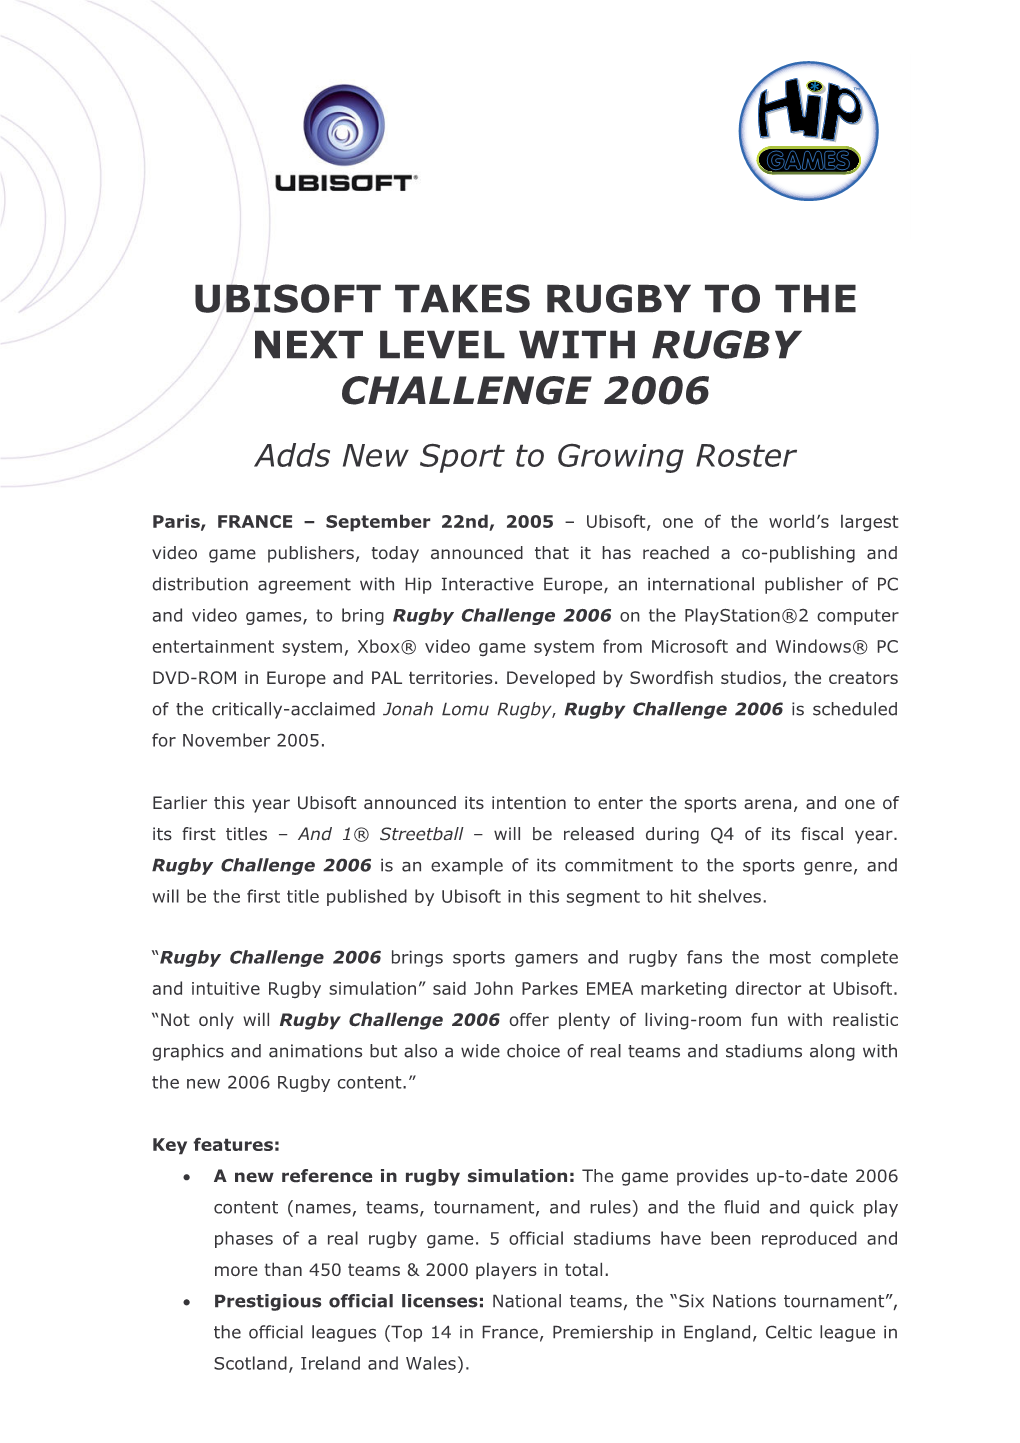 Ubisoft Takes Rugby to the Next Level with Rugby Challenge 2006